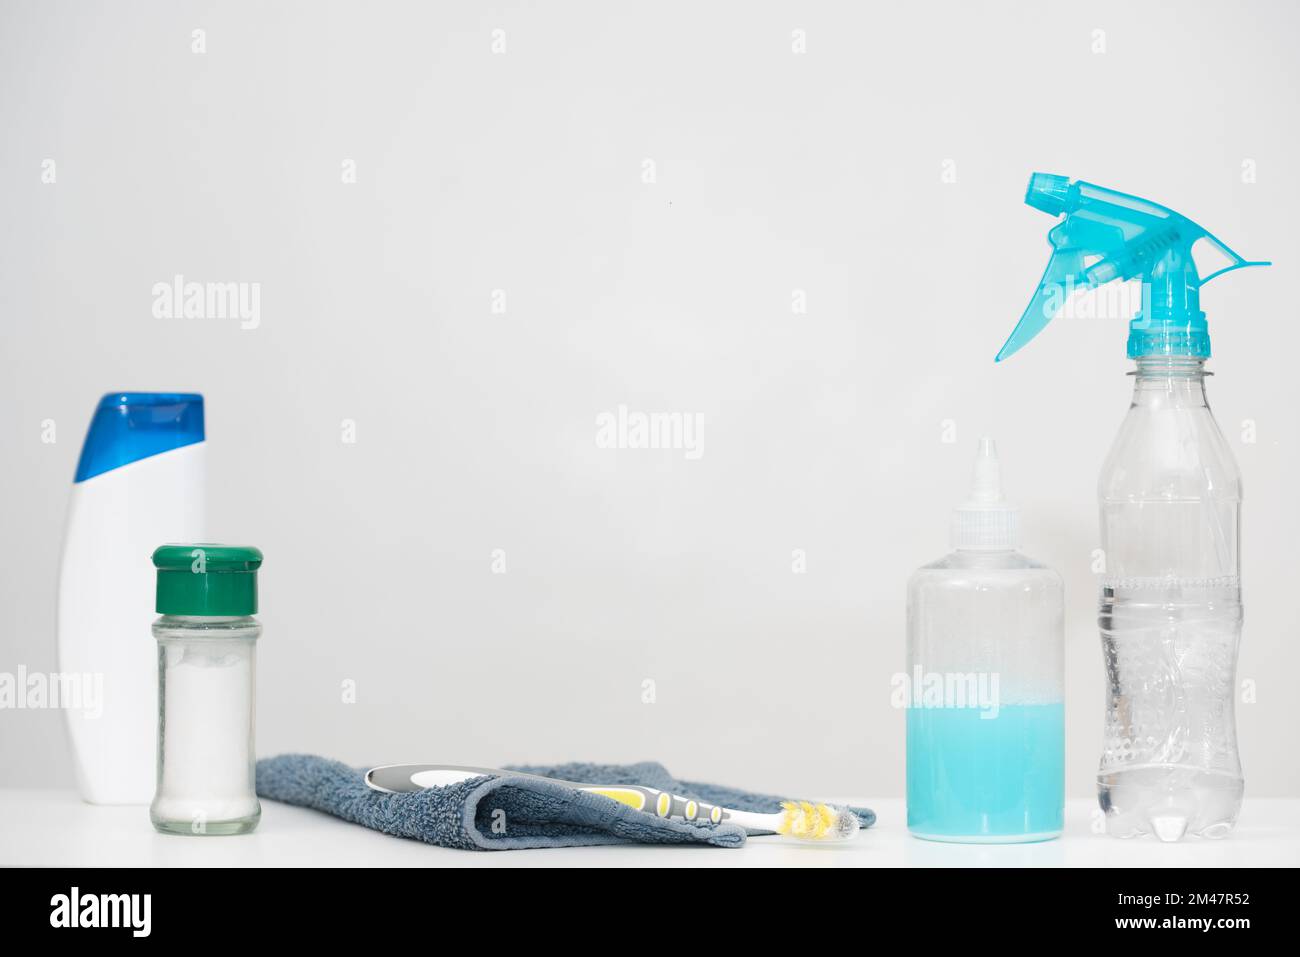 Home cleaning products in reused plastic bottles. Recycled household materials on white background. Horizontal copy space. Save our planet concept. Stock Photo